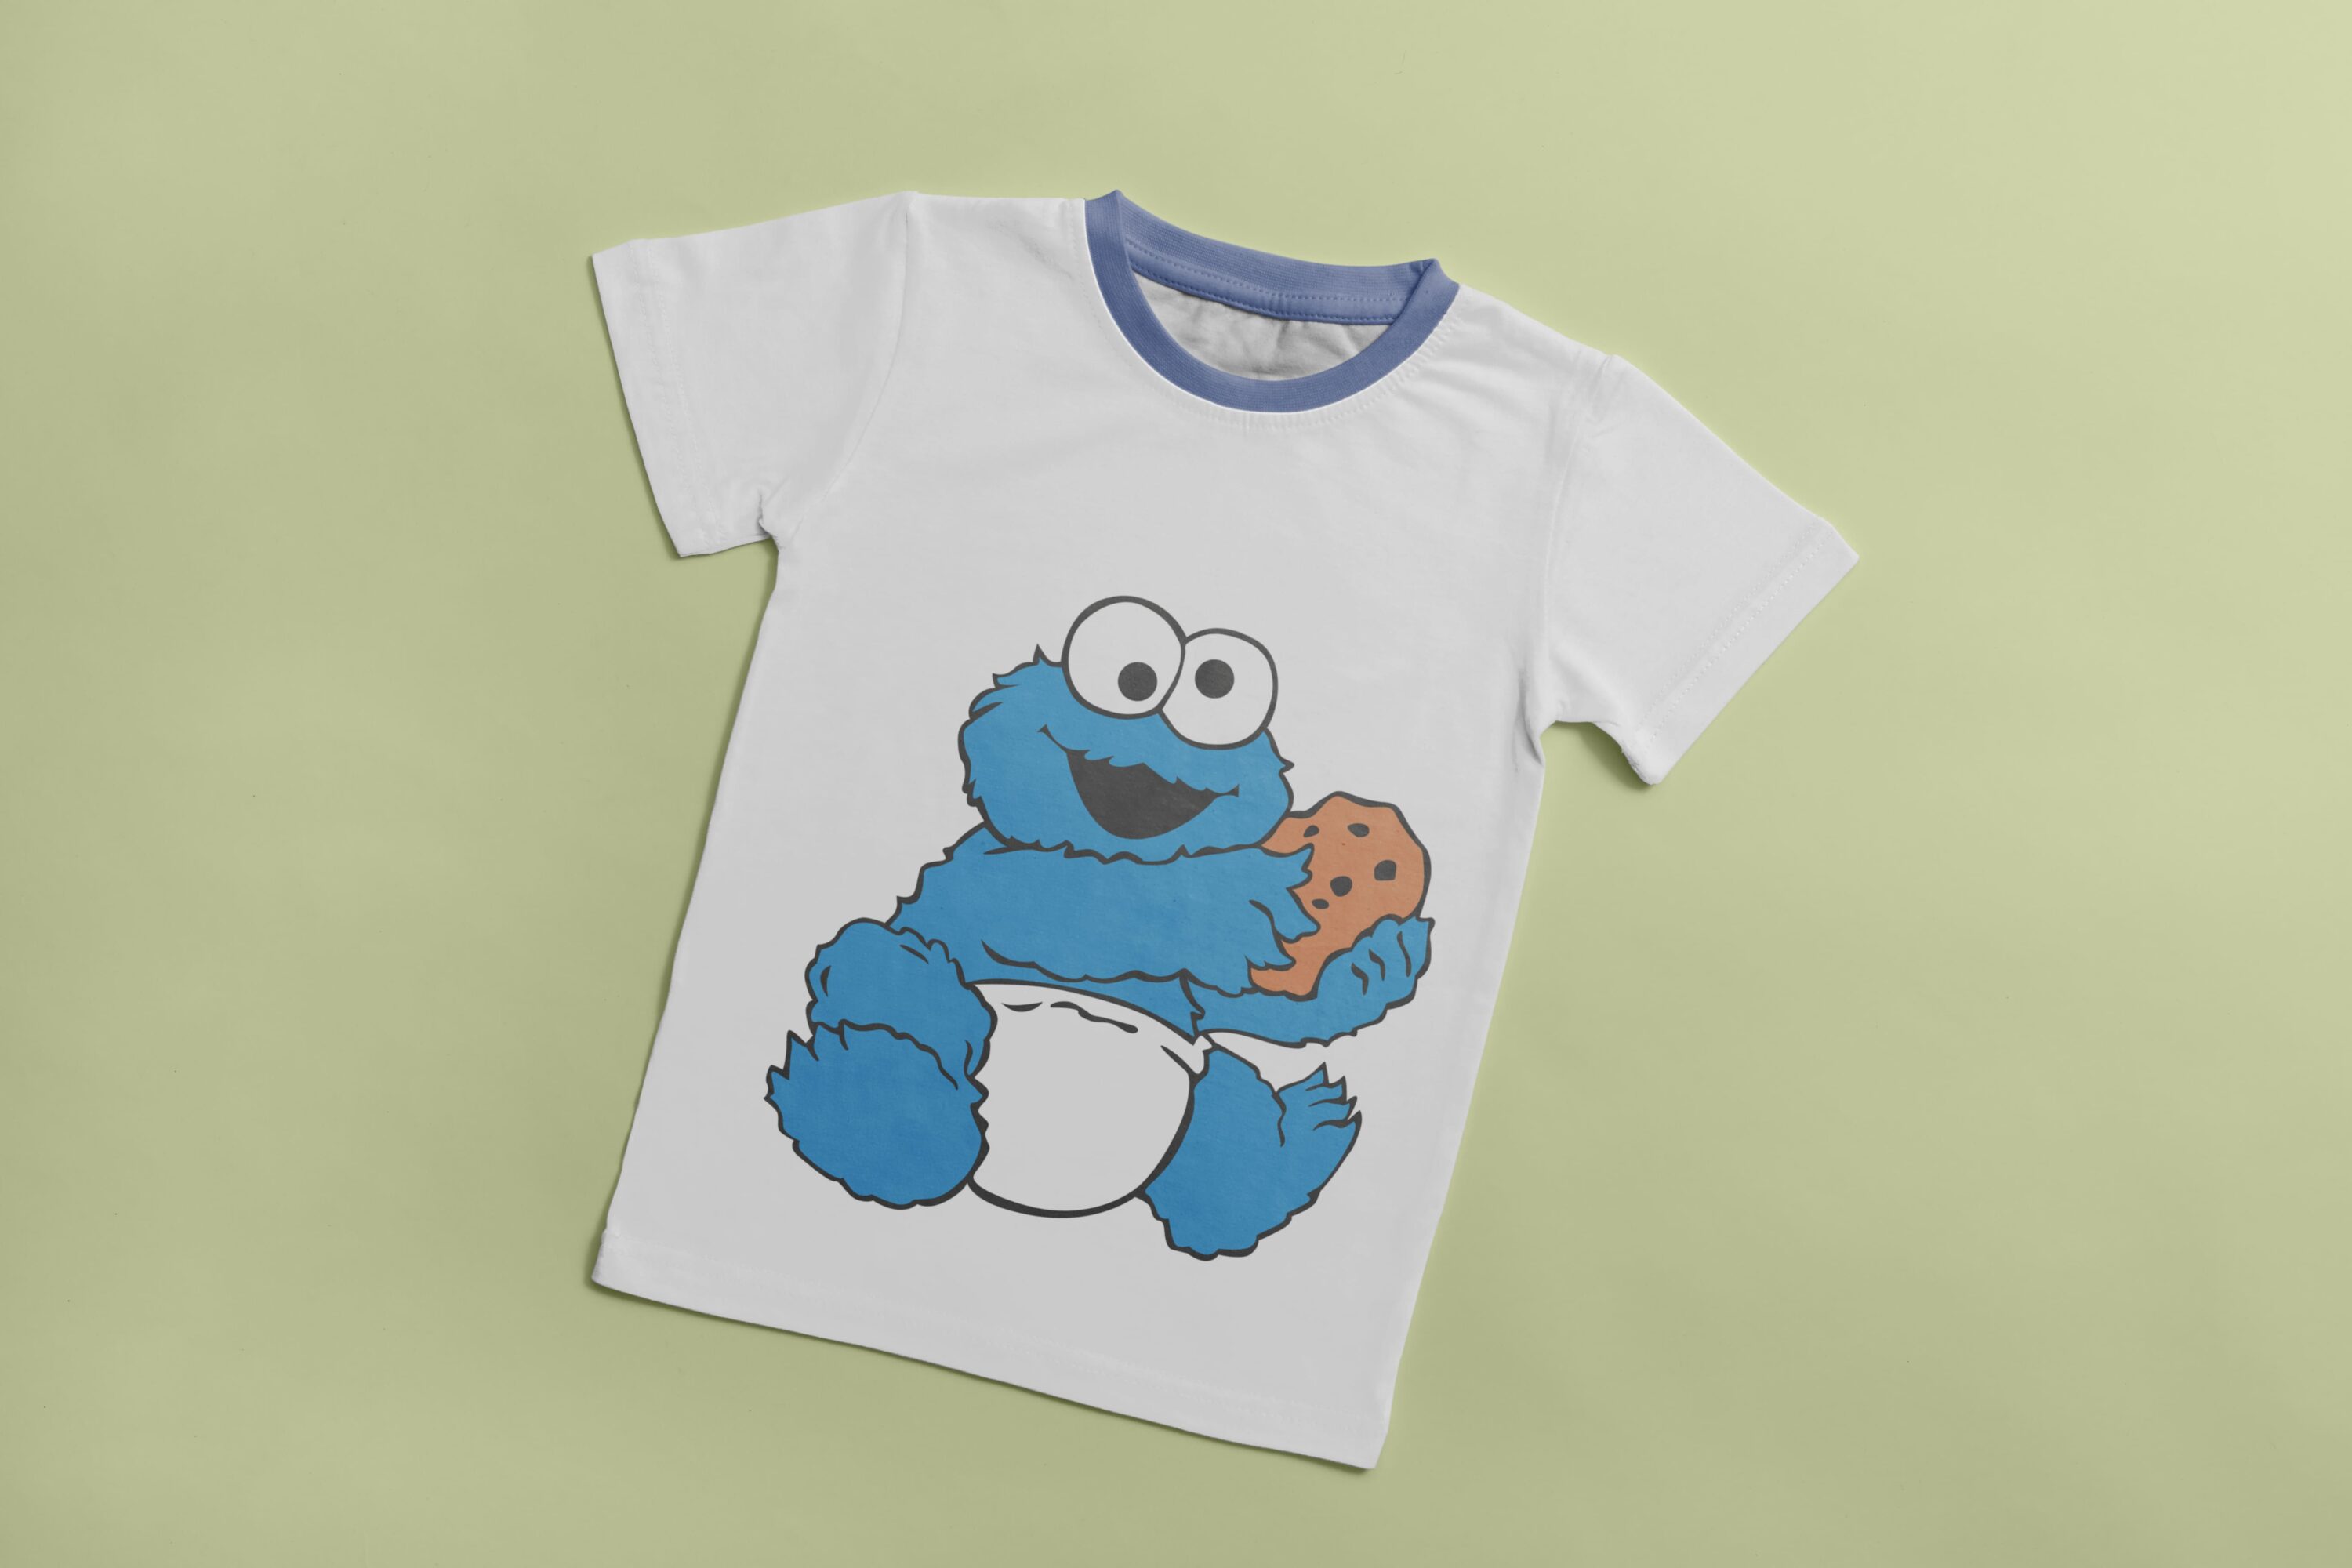 White T-shirt with a blue collar and an image of a blue baby Cookie Monster, holding a cookie.